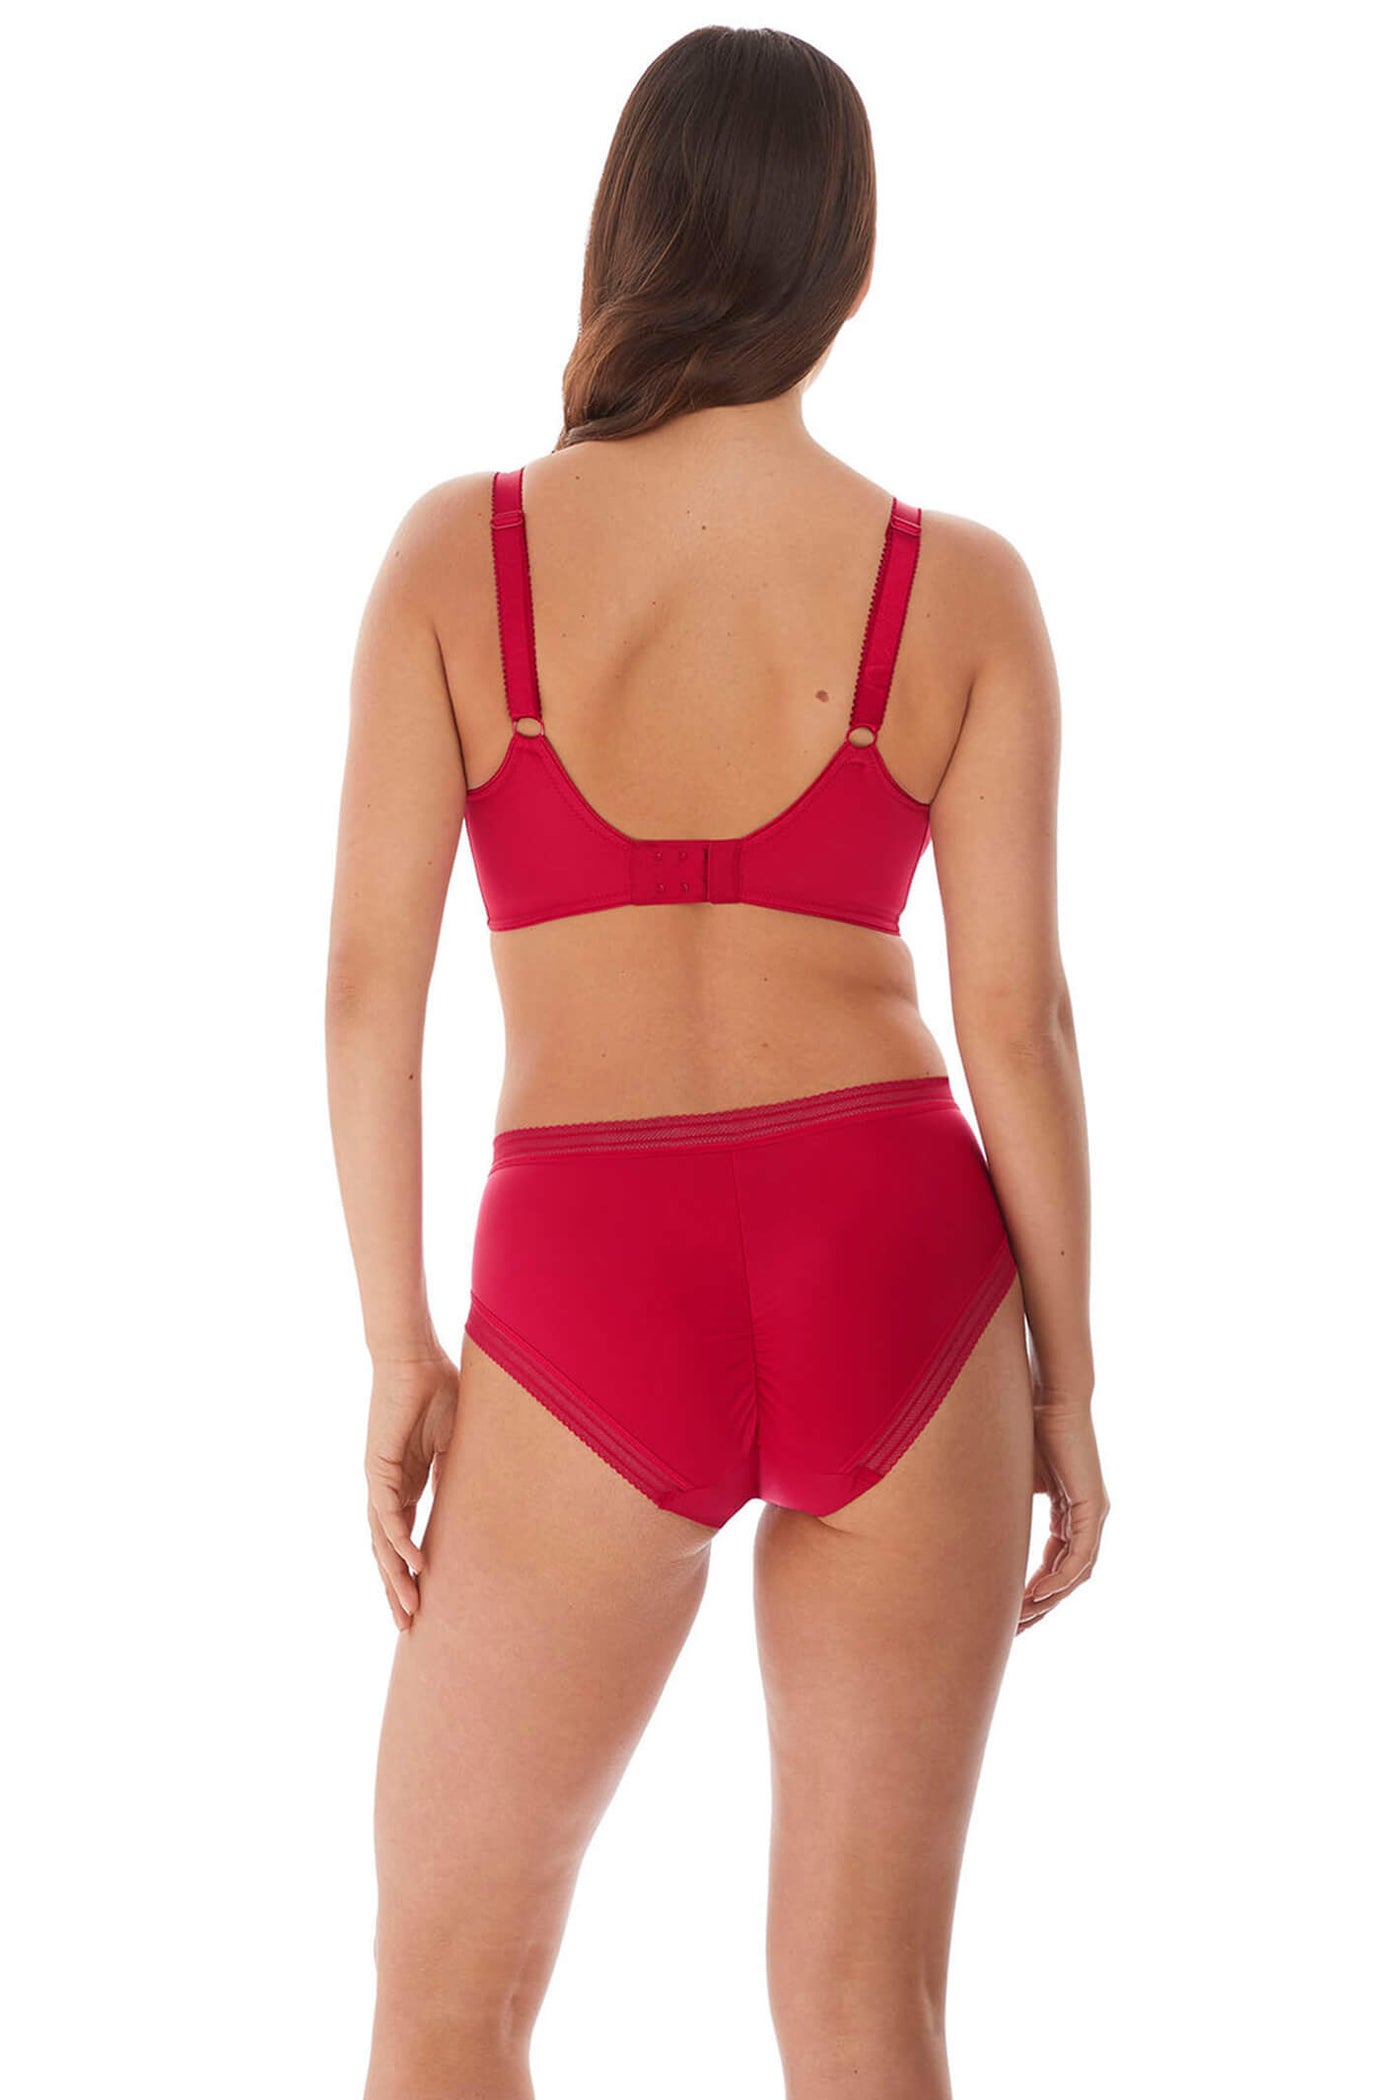 Fantasie FL3091 Fusion Red UW Full Cup Side Support Bra